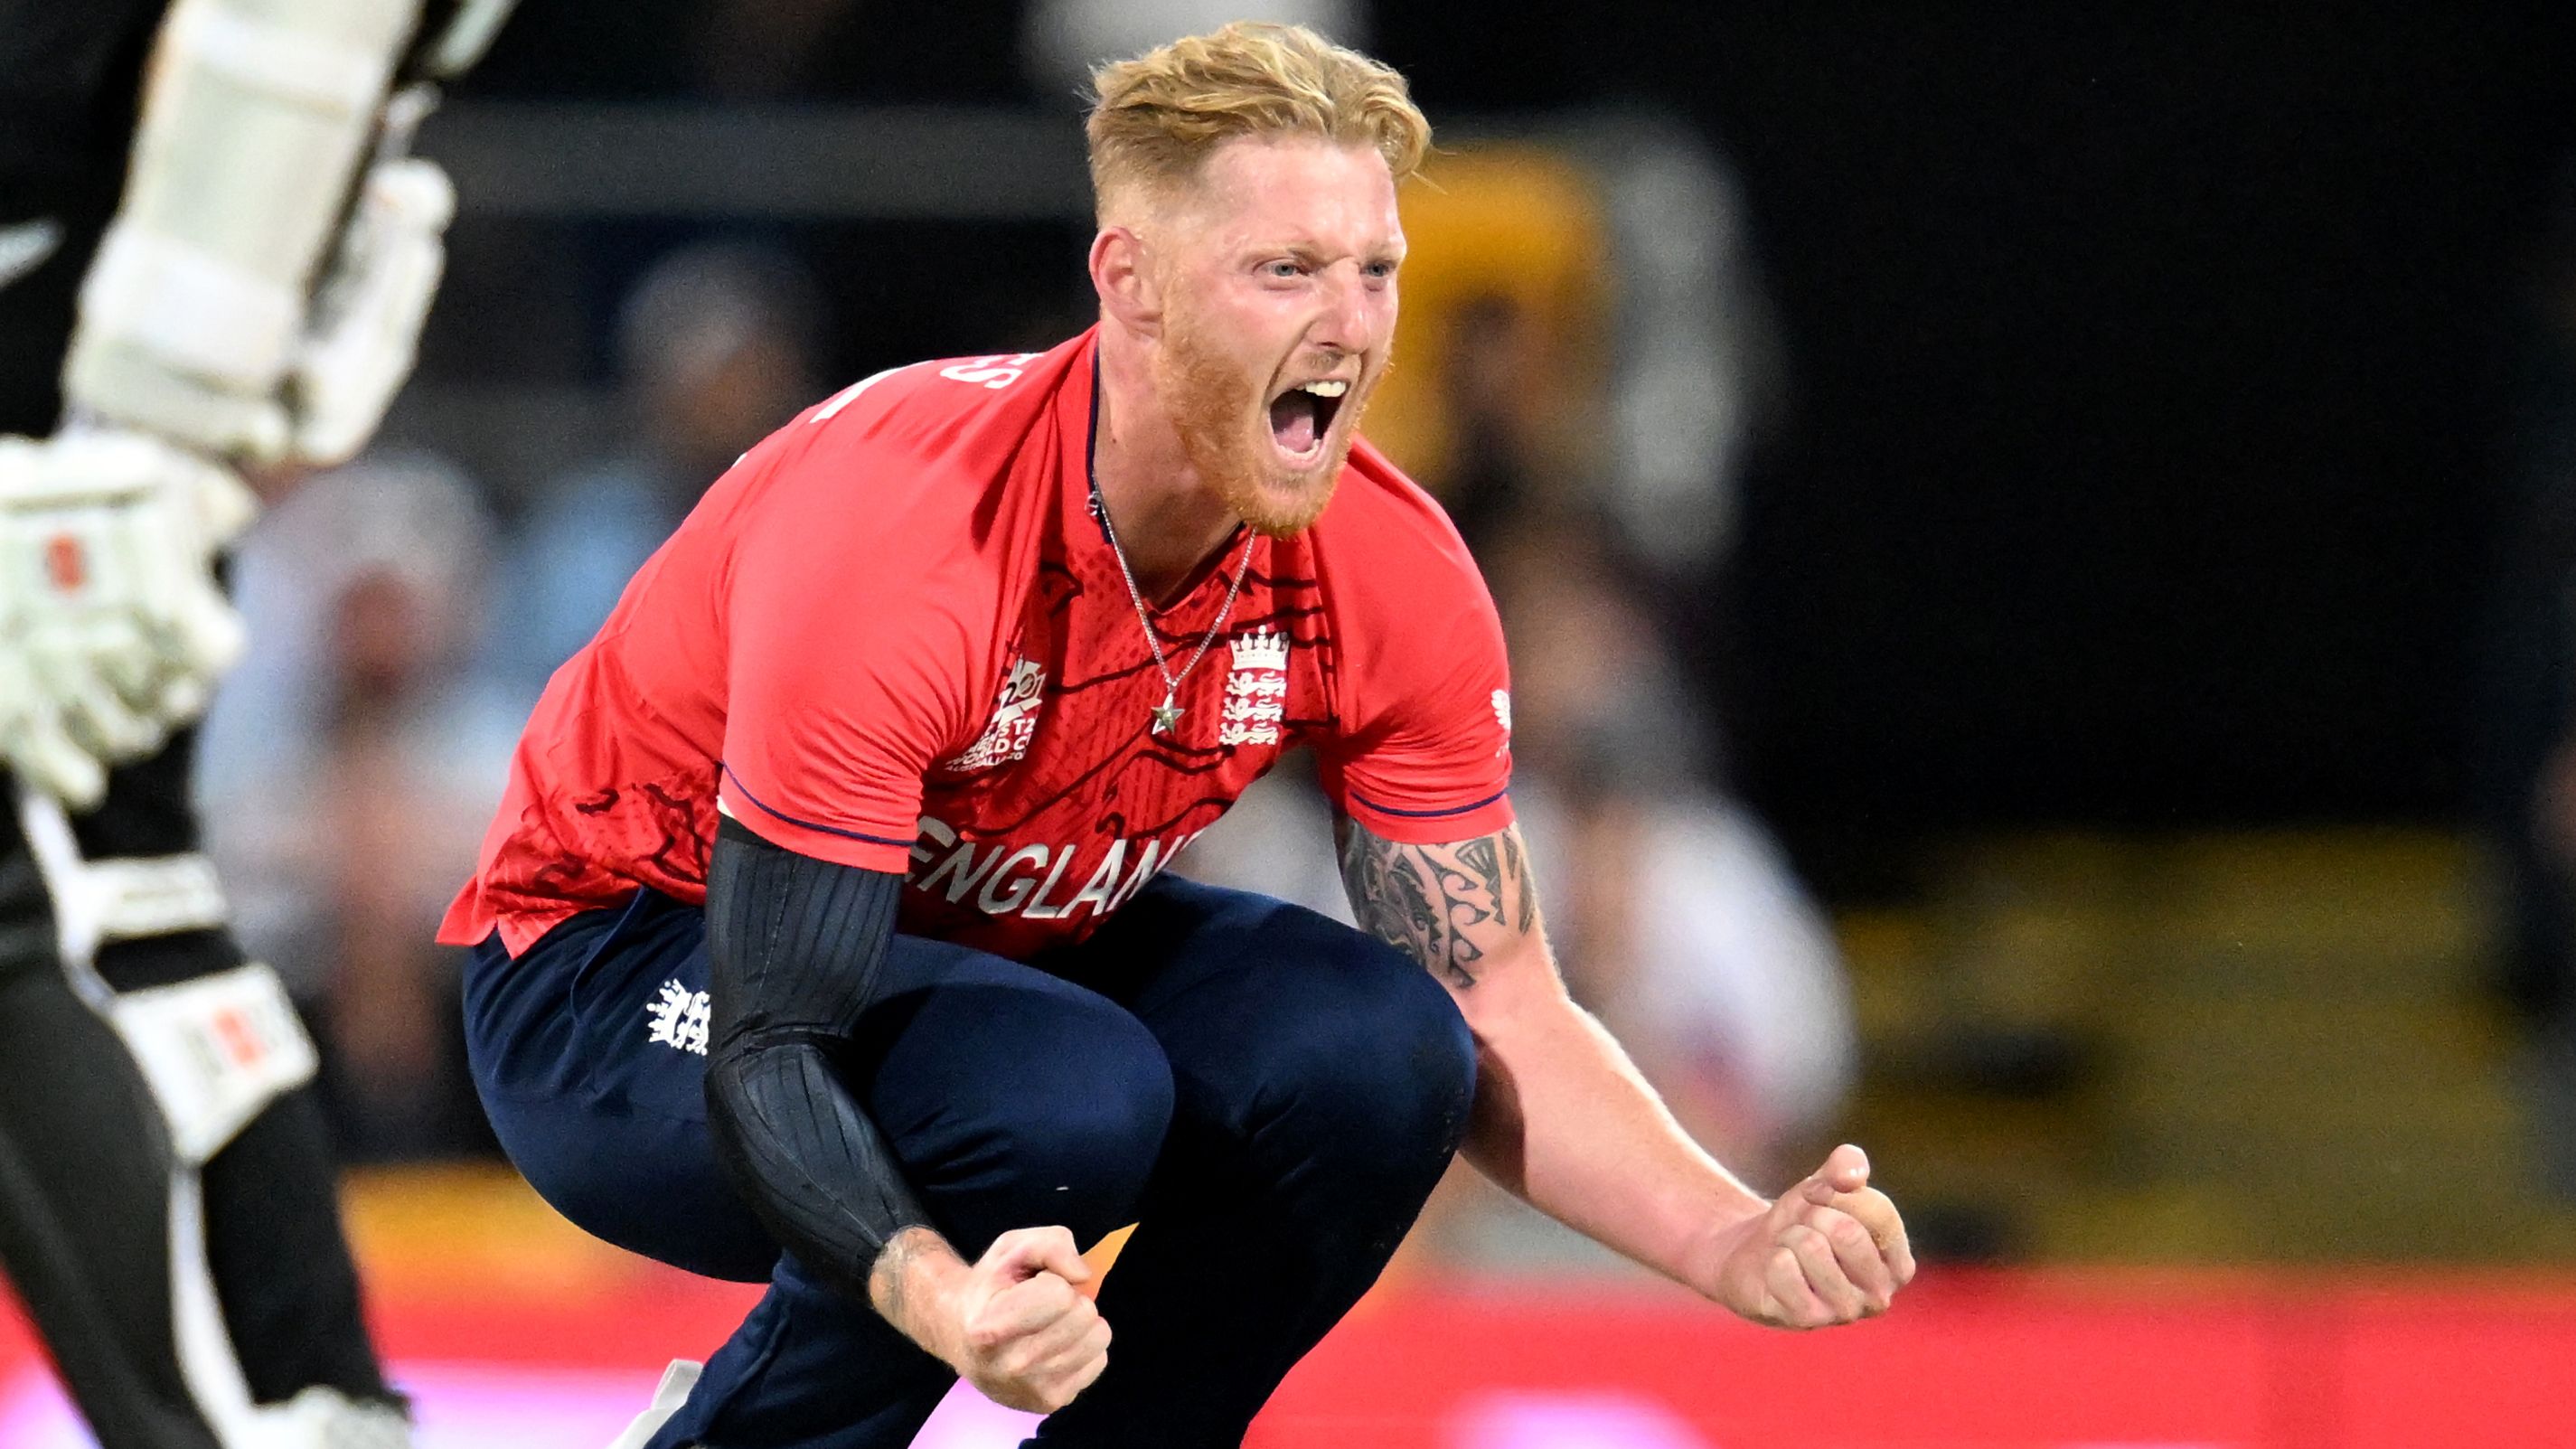 England&#x27;s Ben Stokes celebrates the wicket of New Zealand&#x27;s Kane Williamson during the T20 World Cup Super 12 match at The Gabba in Brisbane, Australia. Picture date: Tuesday November 1, 2022. (Photo by PA/PA Images via Getty Images)